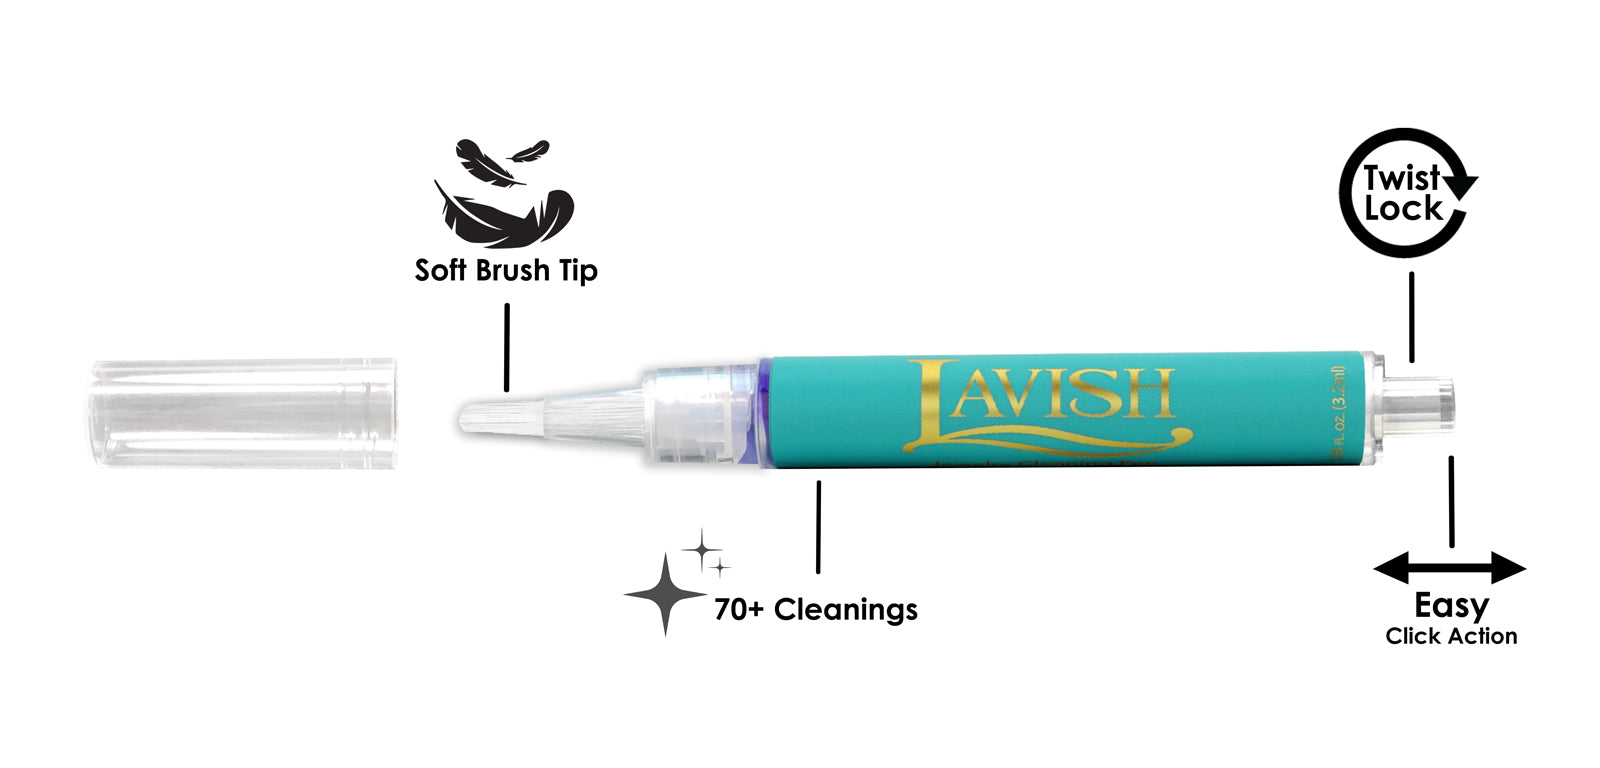 Make Your Jewelry Sparkle With This Top-Rated $9 Cleaning Pen